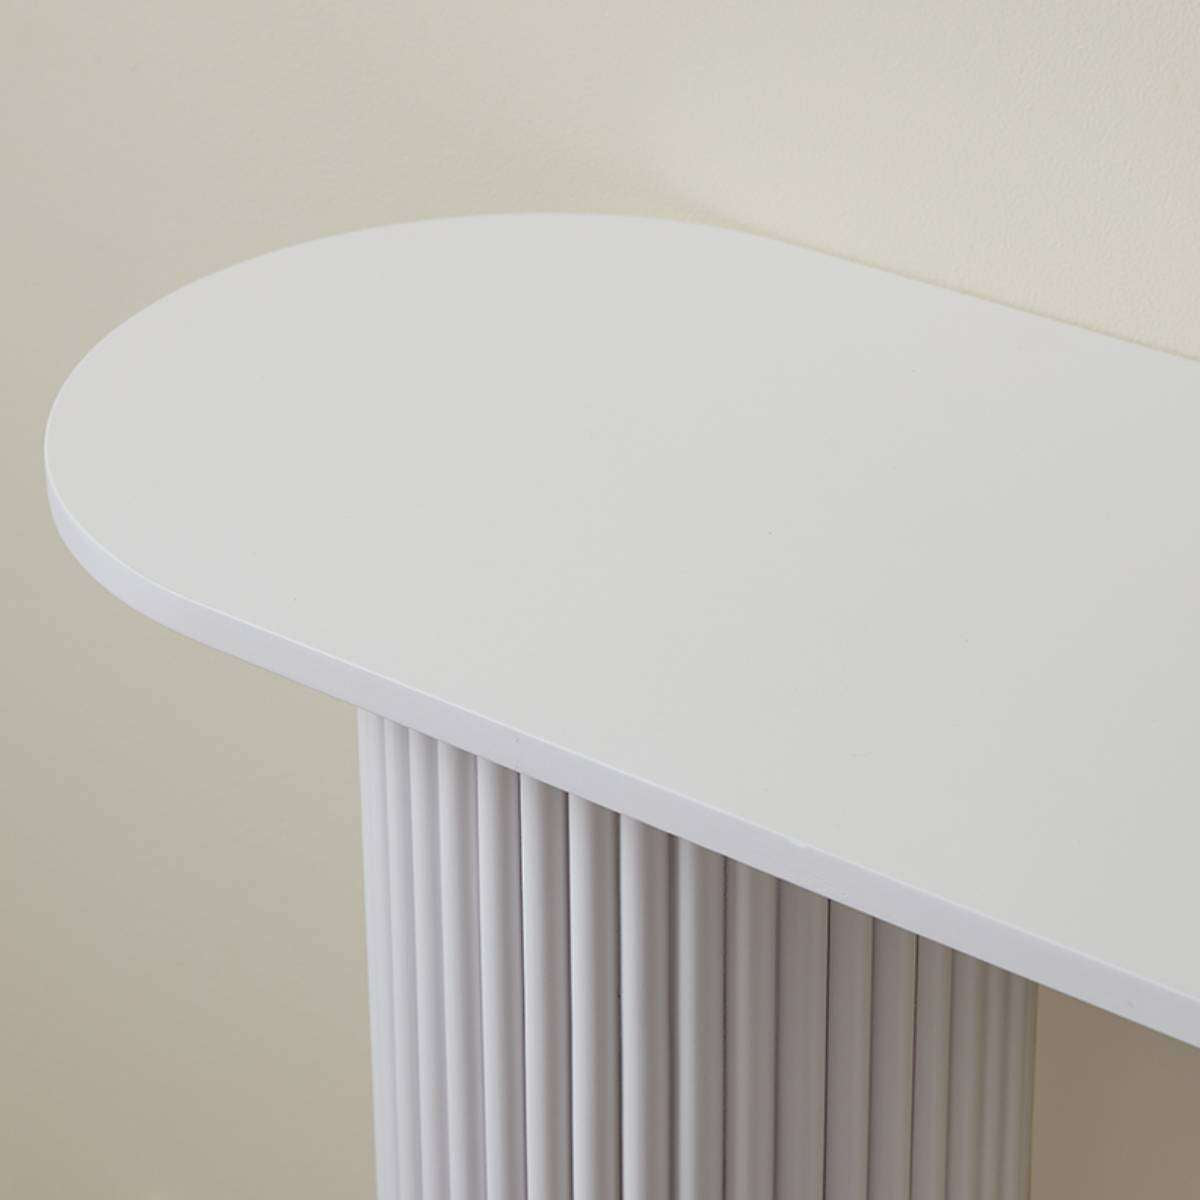 Eve Console Table - White